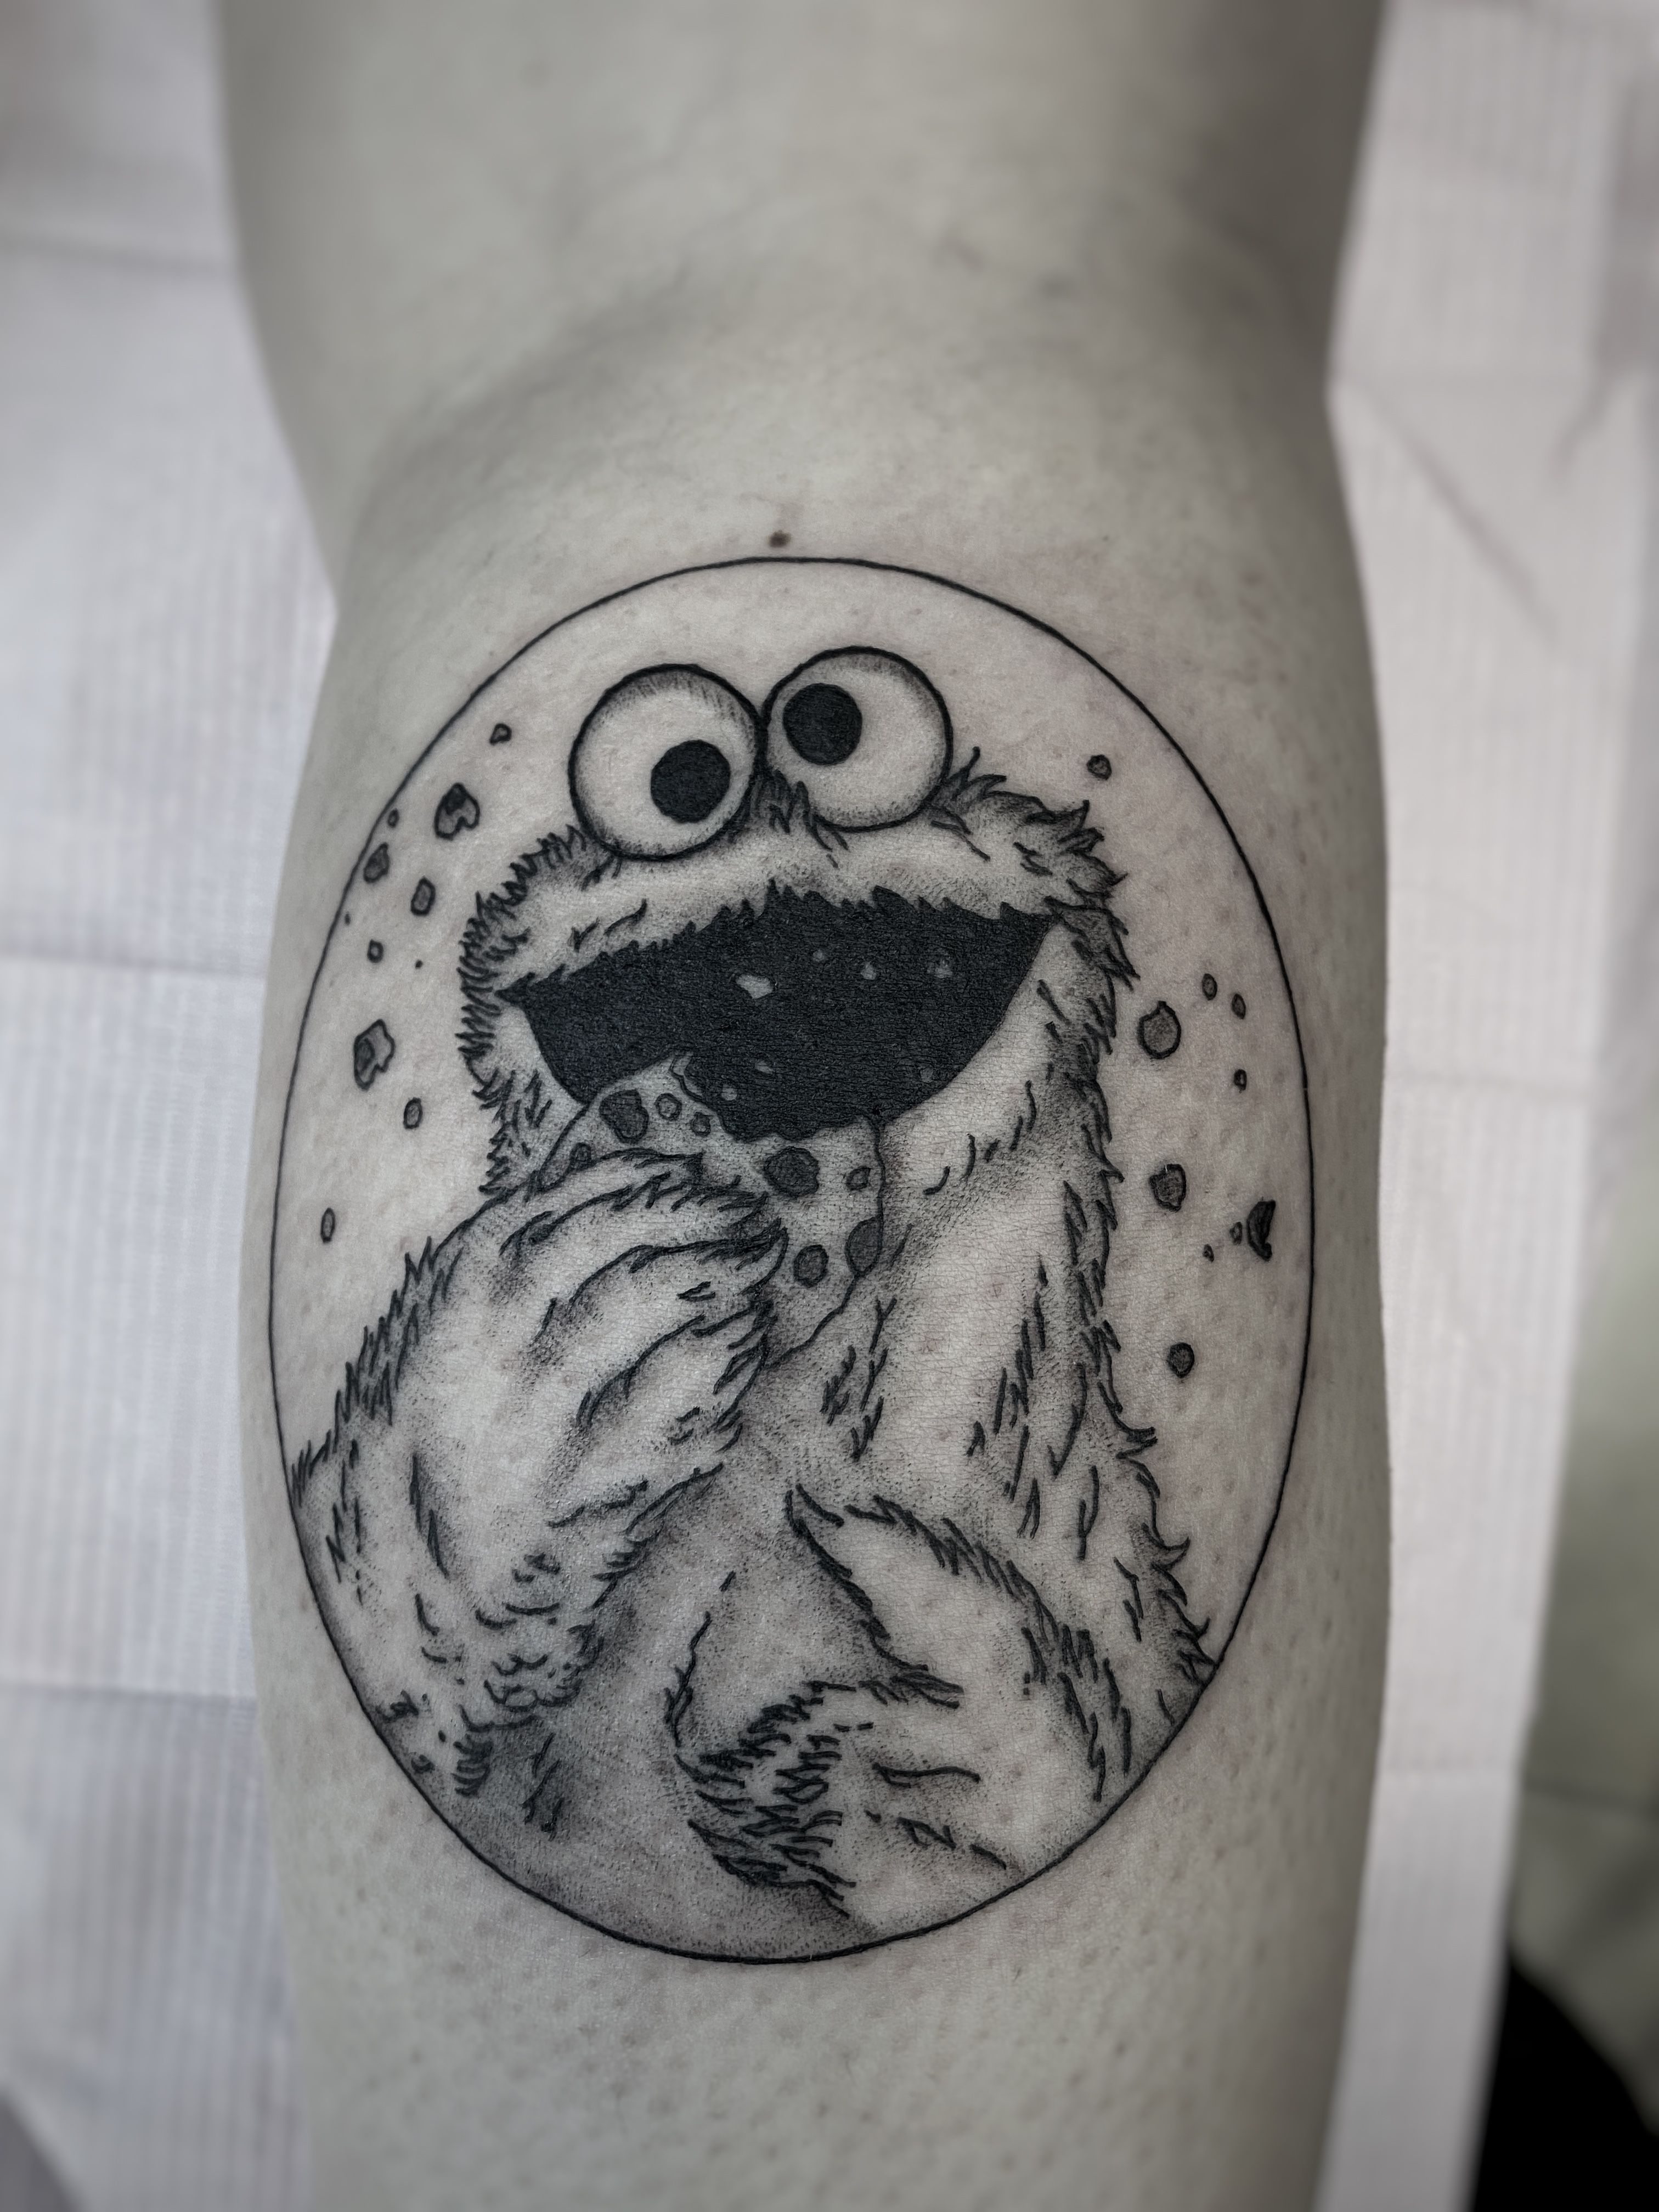 Elmo and Cookie Monster tattoo ❤️💙 | Instagram